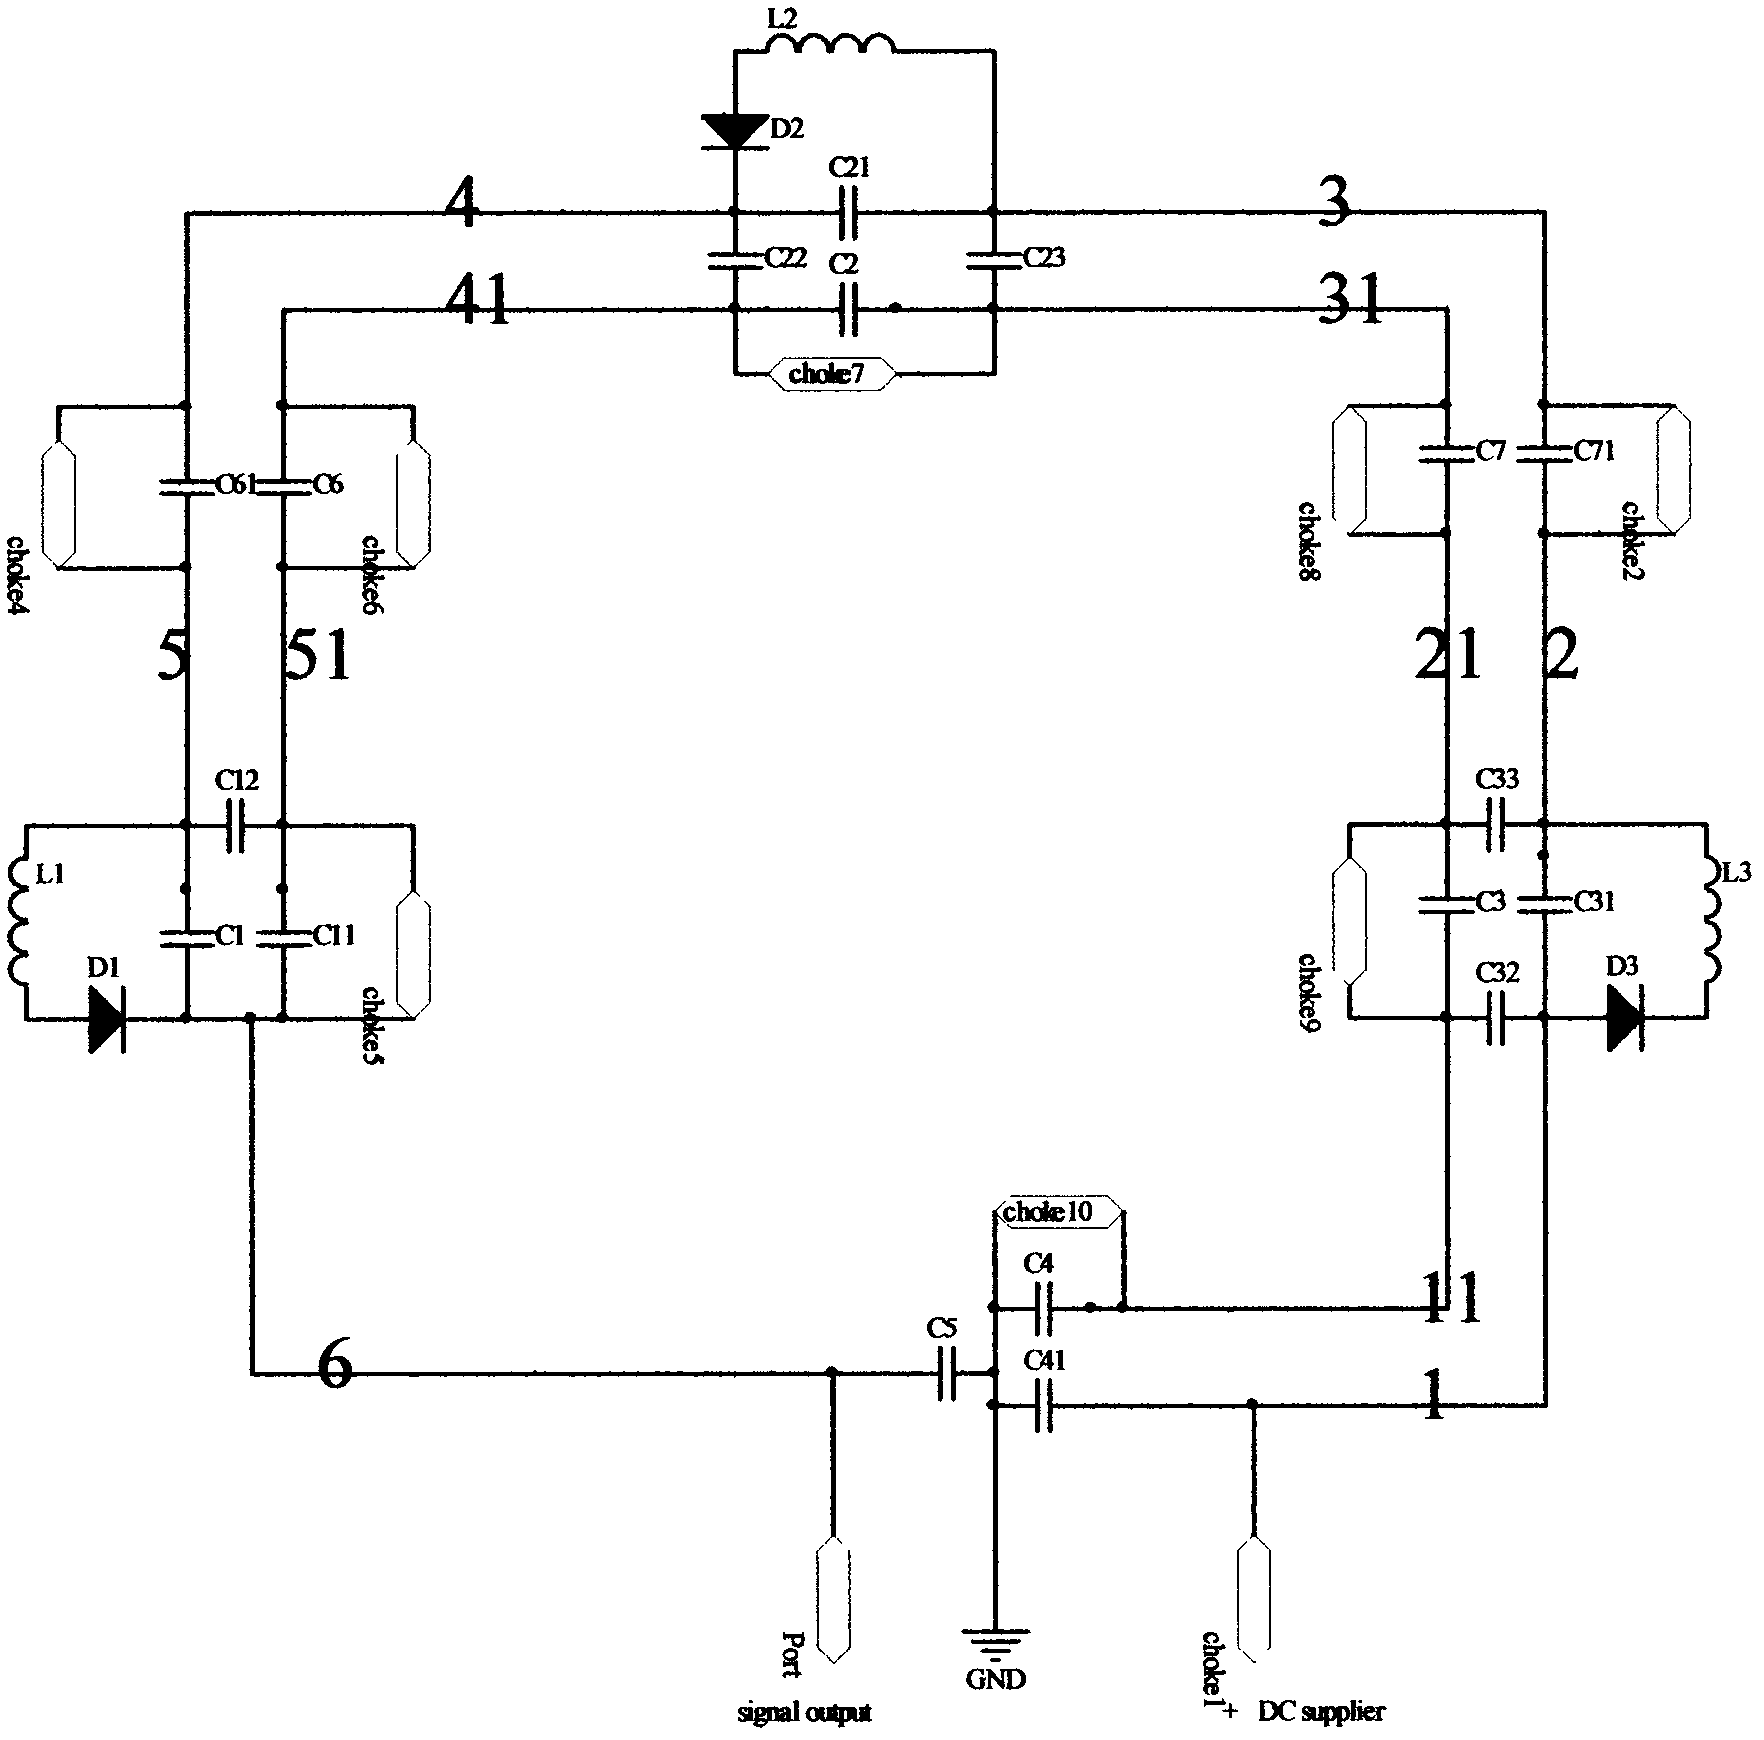 Detuning magnetic resonance radio frequency coil without external direct current circuit